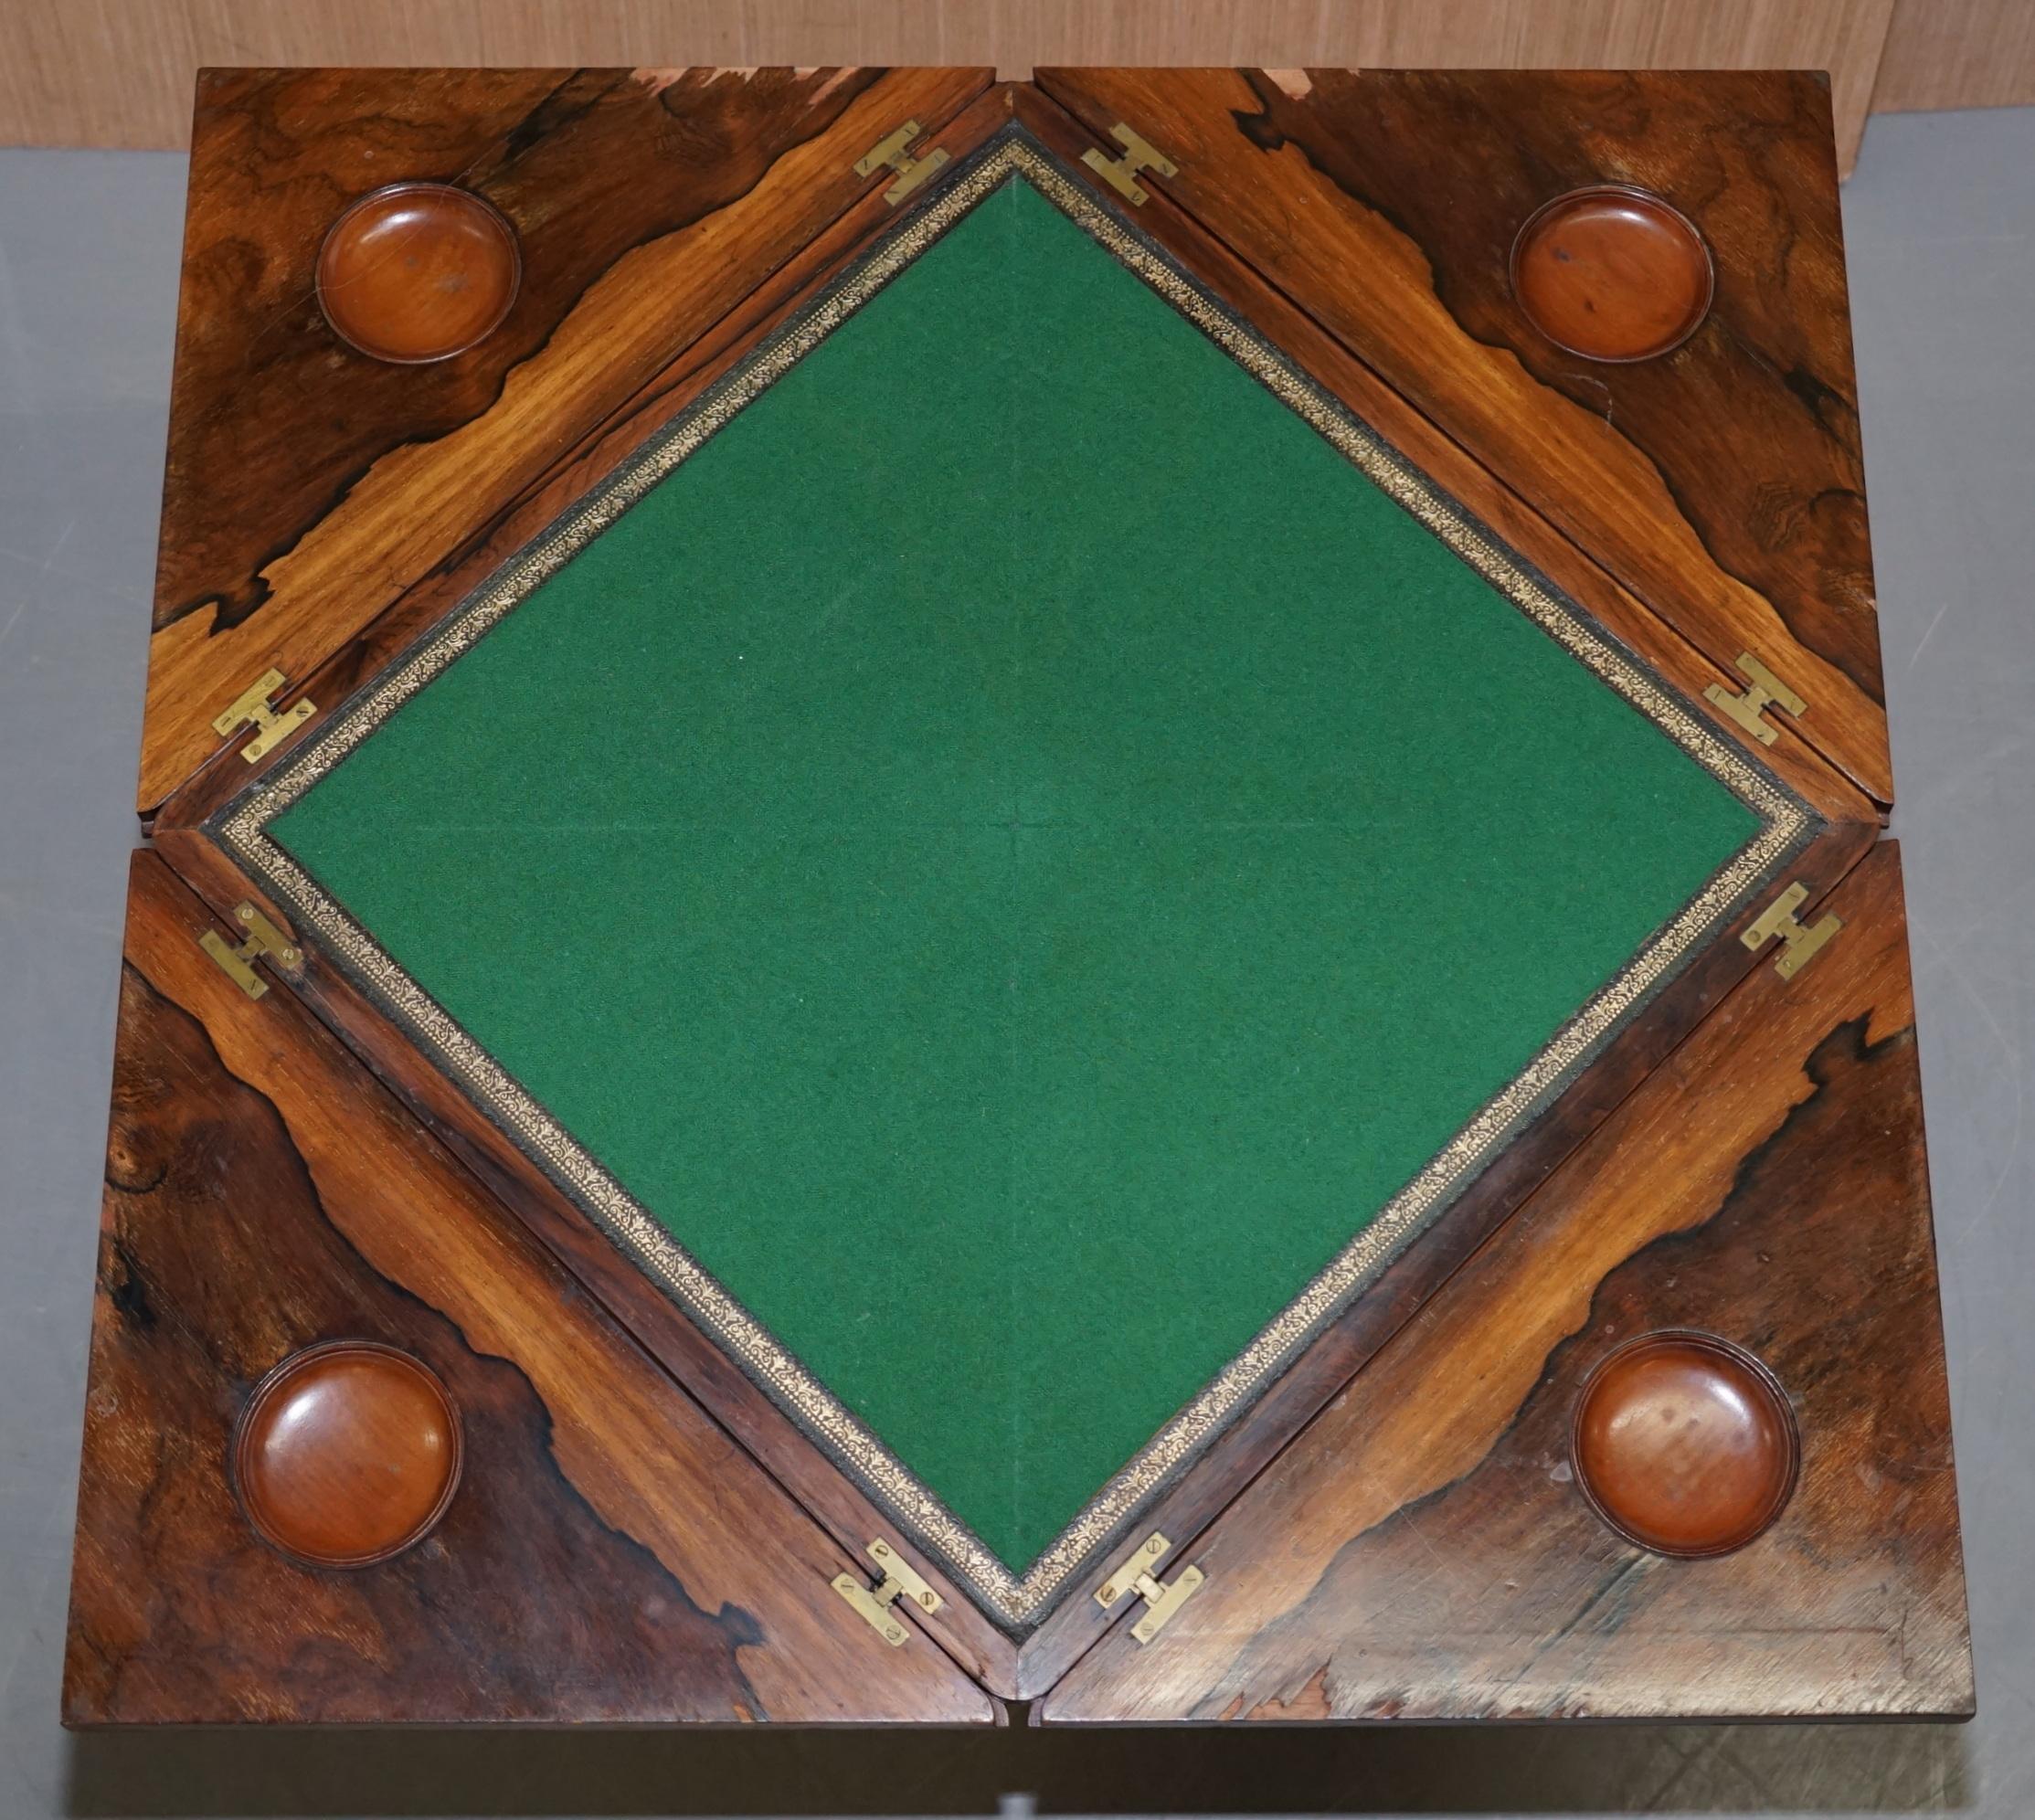 Victorian Mahogany Games Envelope Rare Wood Table circa 1880 Unfolds Extends 7